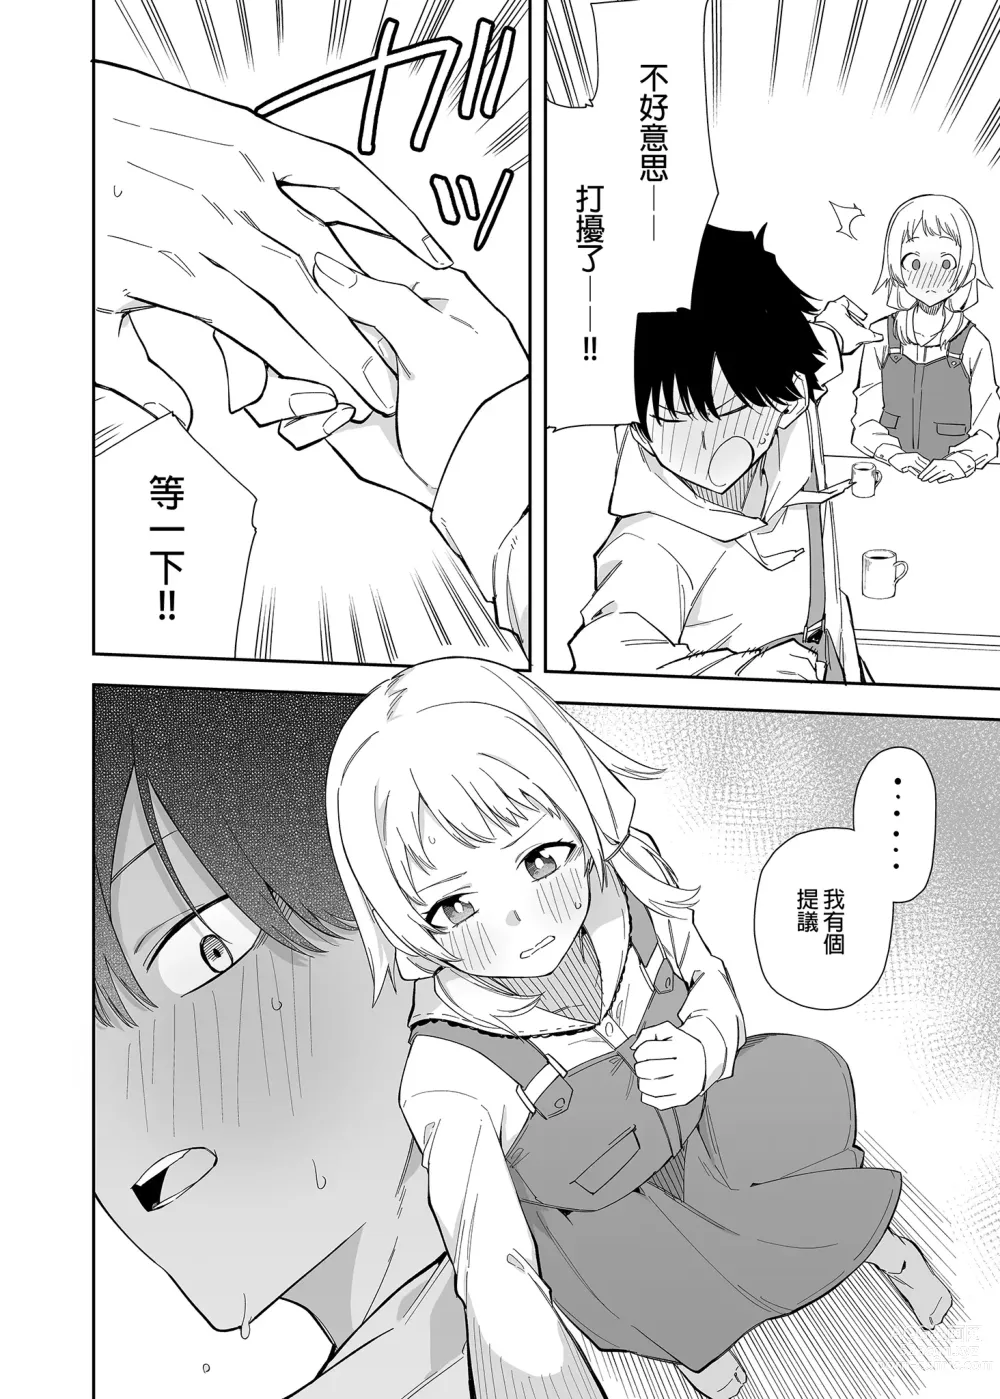 Page 12 of doujinshi 隣人は有名配信者